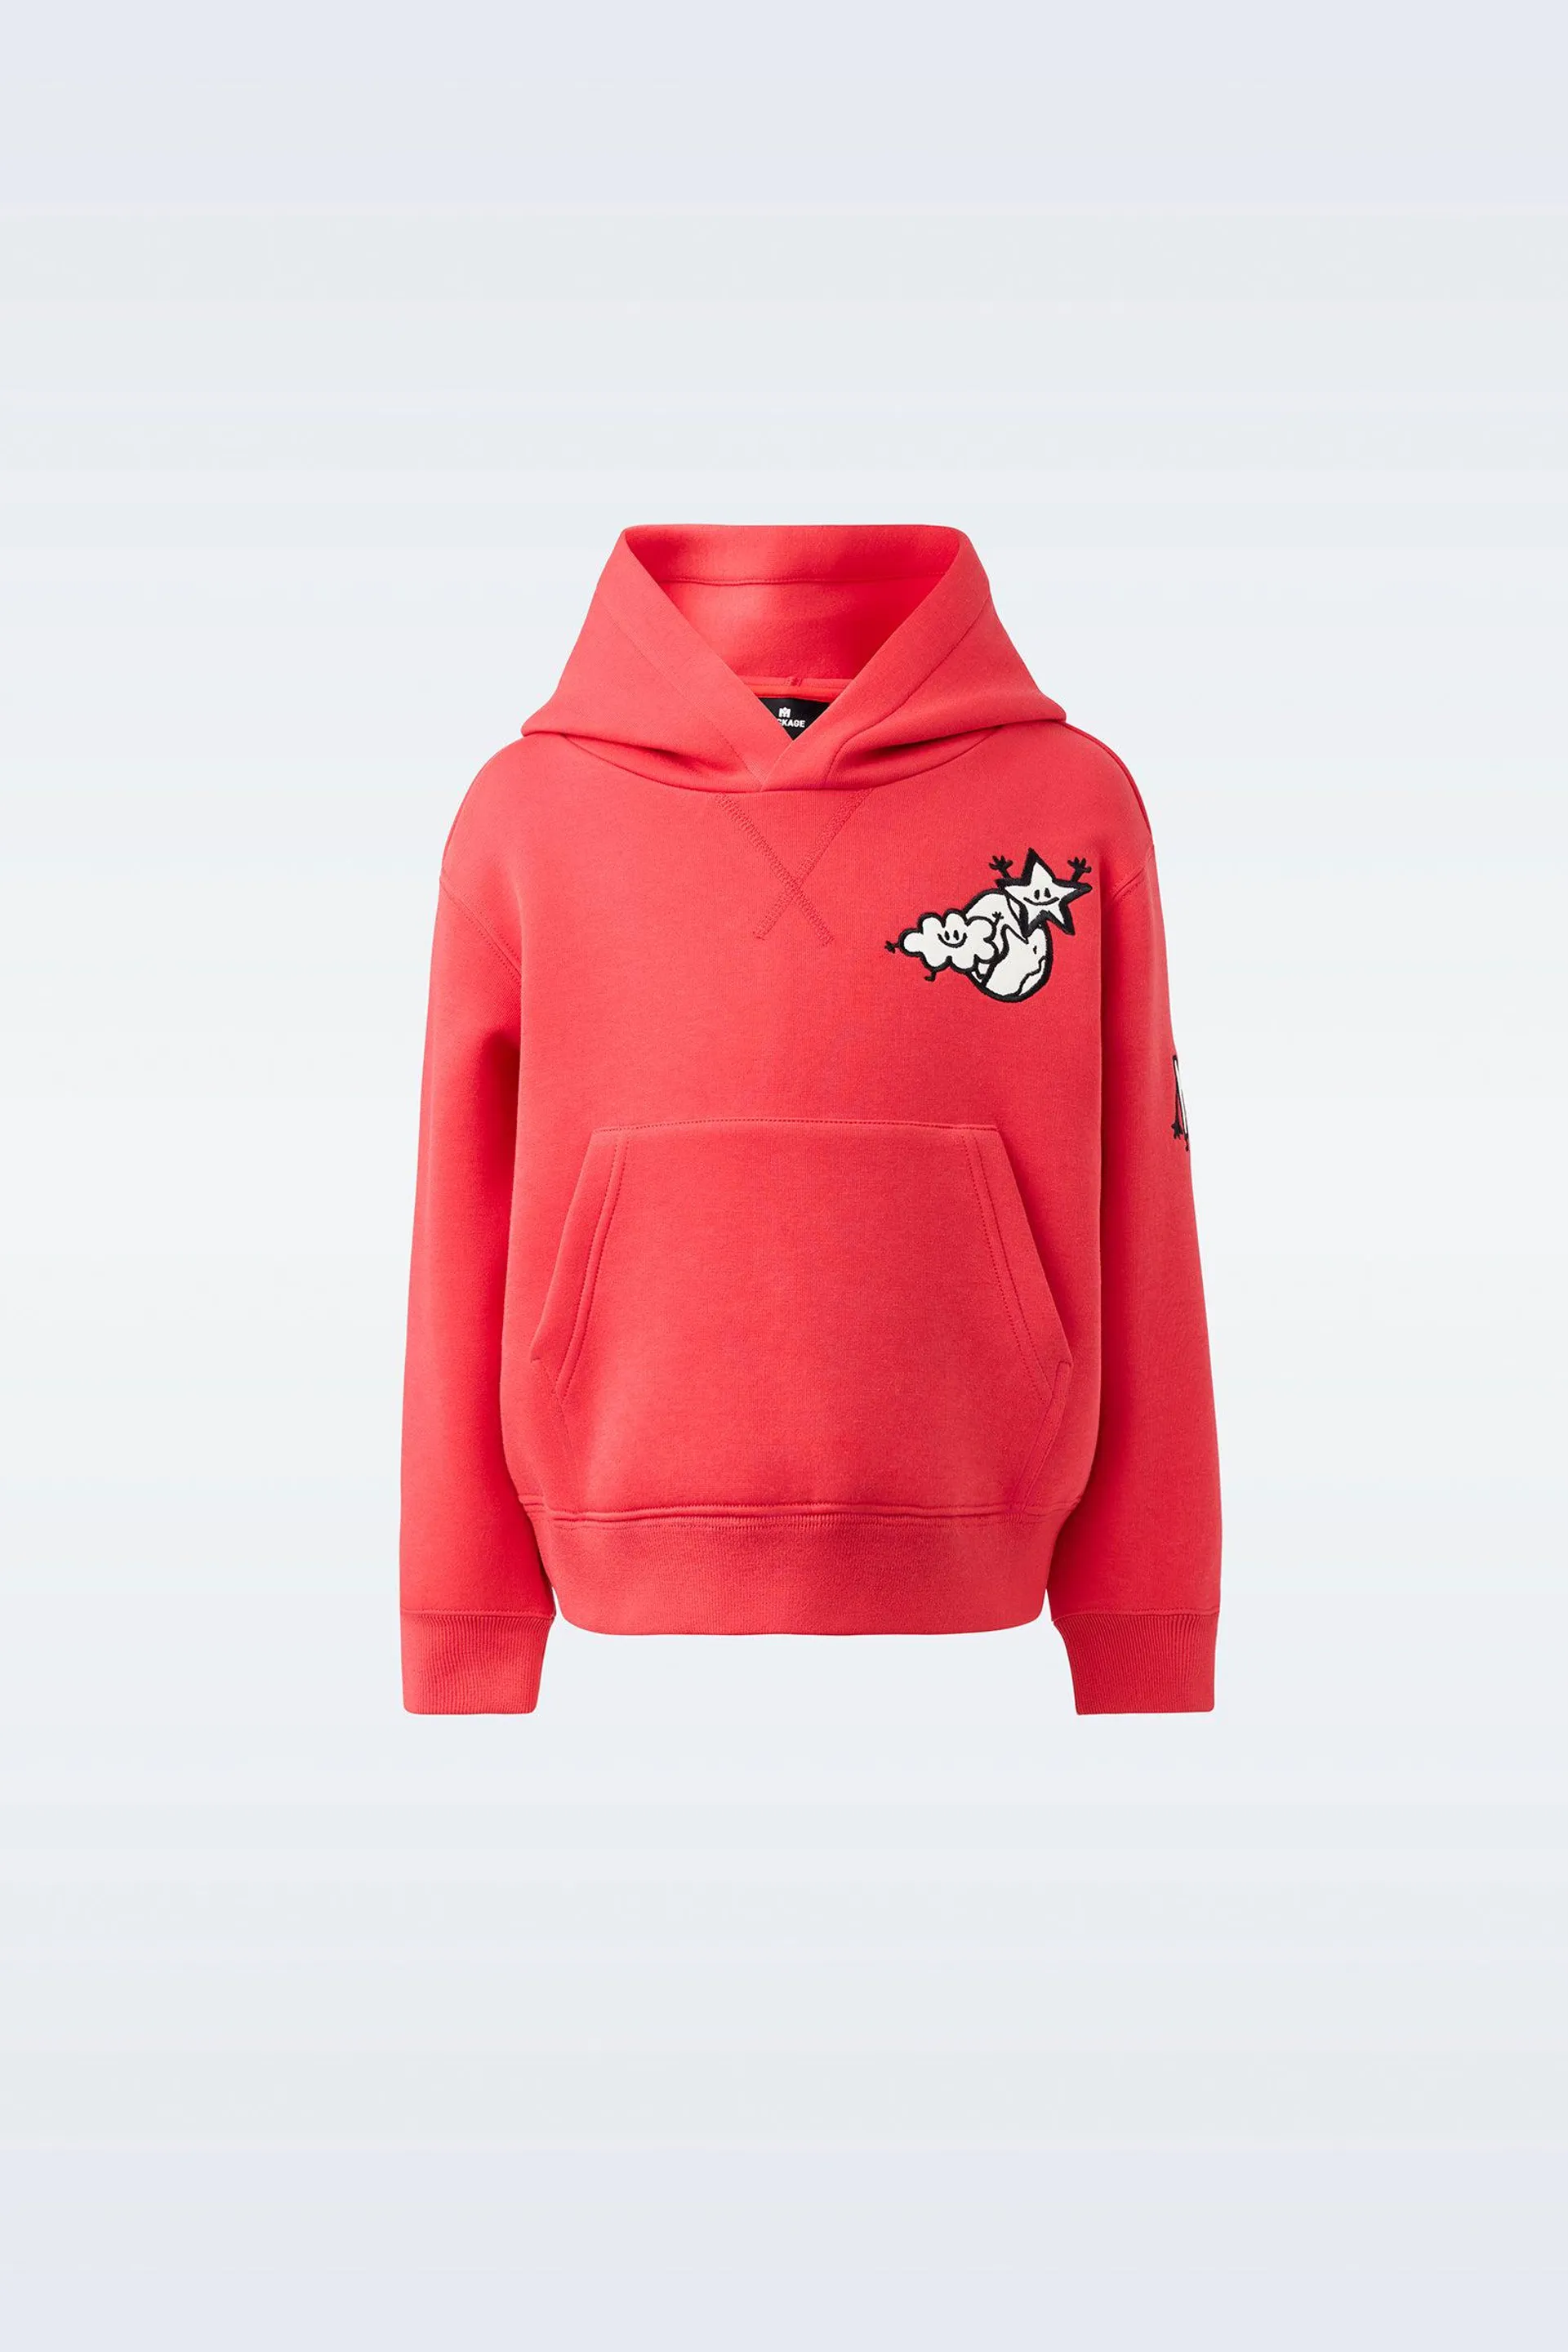 DRU-TML Double-face jersey hoodie for toddlers (2-6 years)